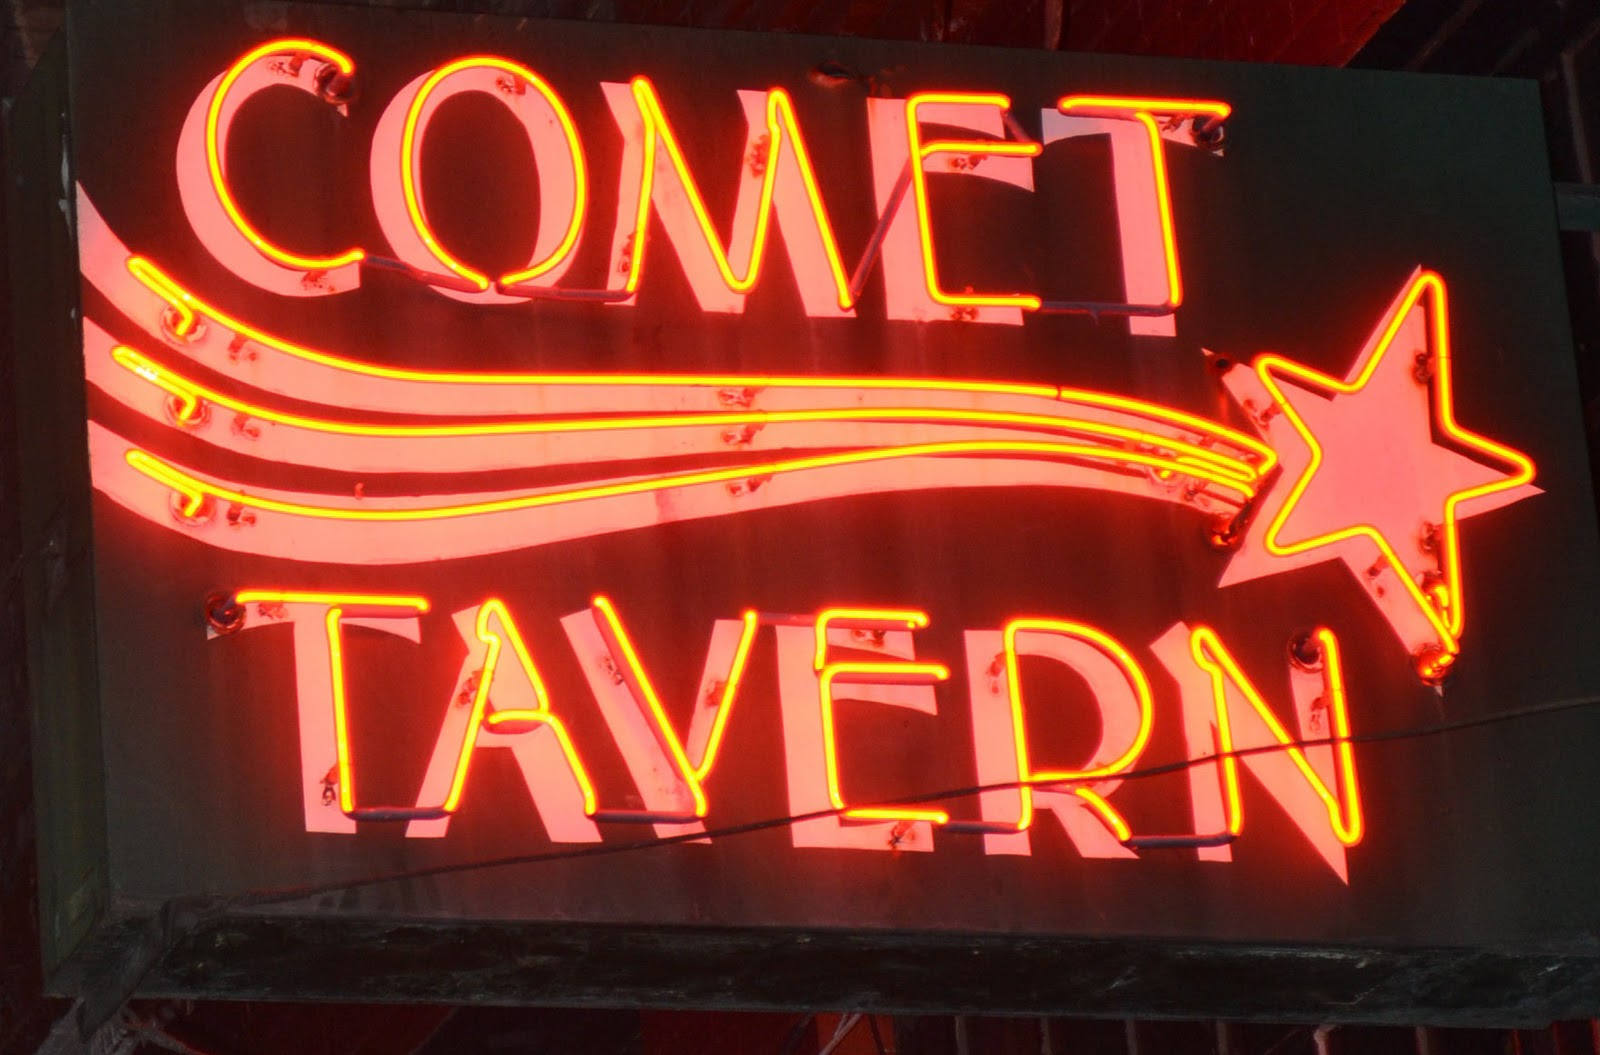 Moments ago, CHS Seattle posted word that “the tavern formerly known as